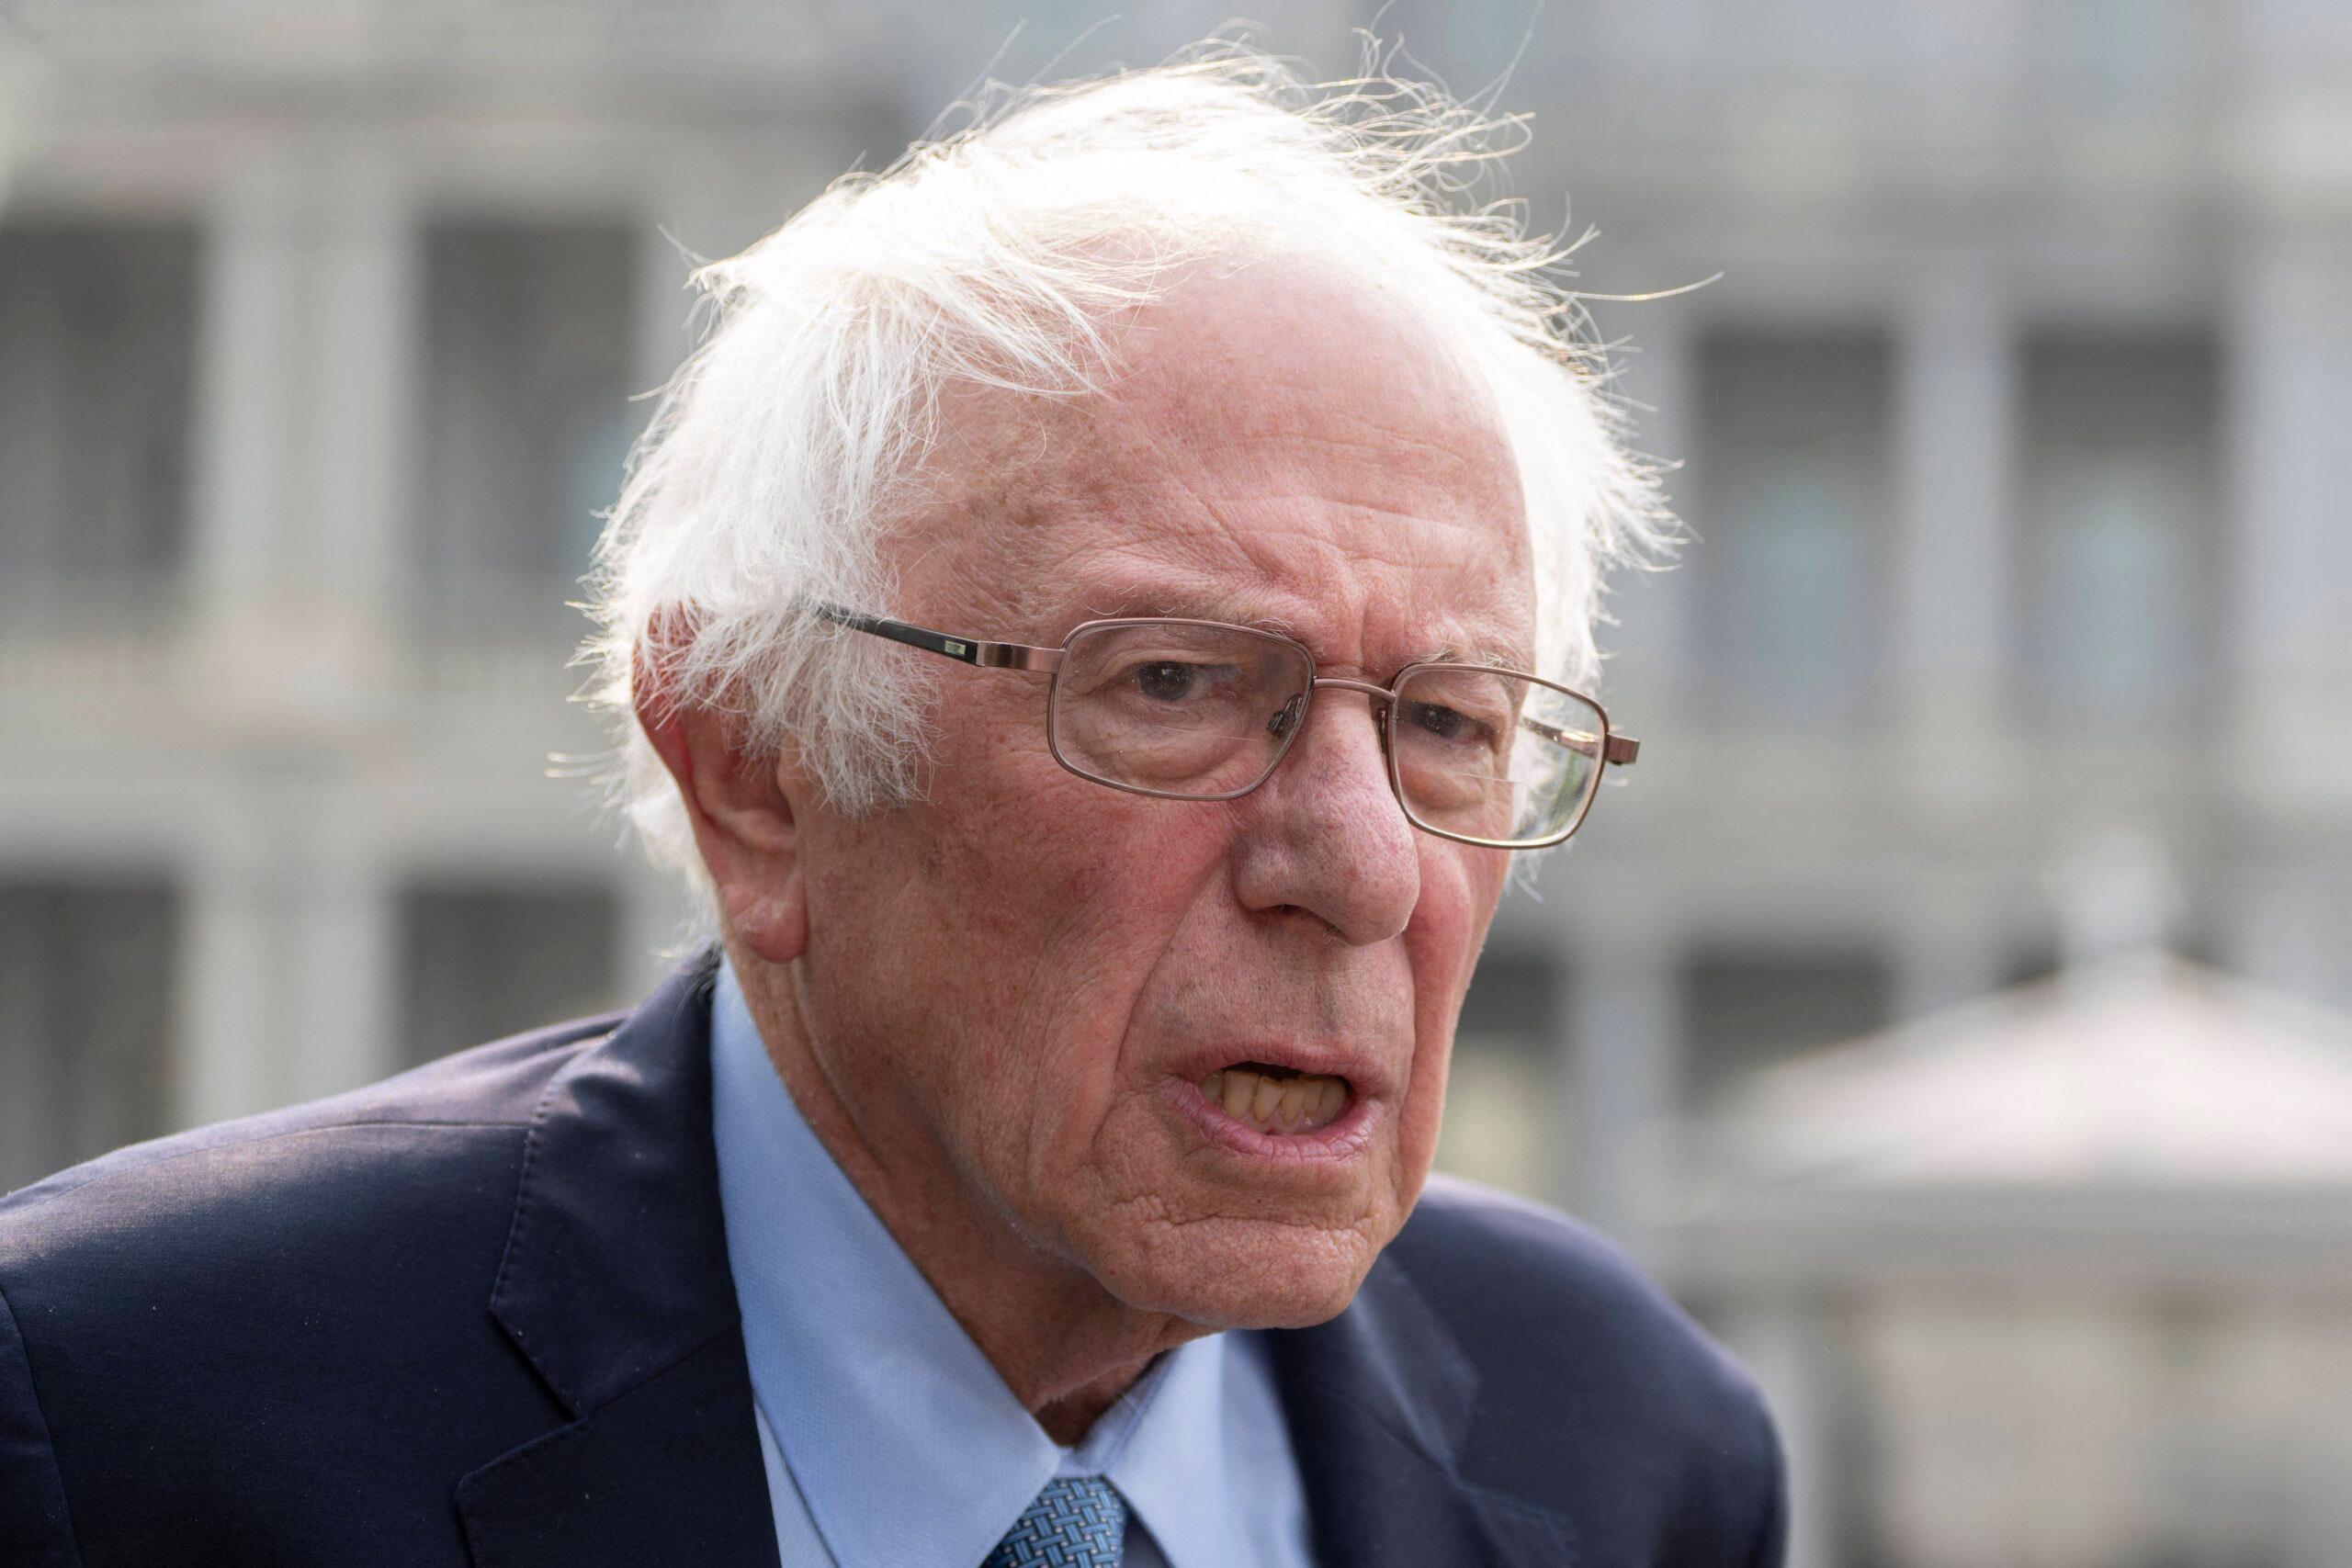 Police Release Photo Of Suspect In Arson Attack On Bernie Sanders' Office